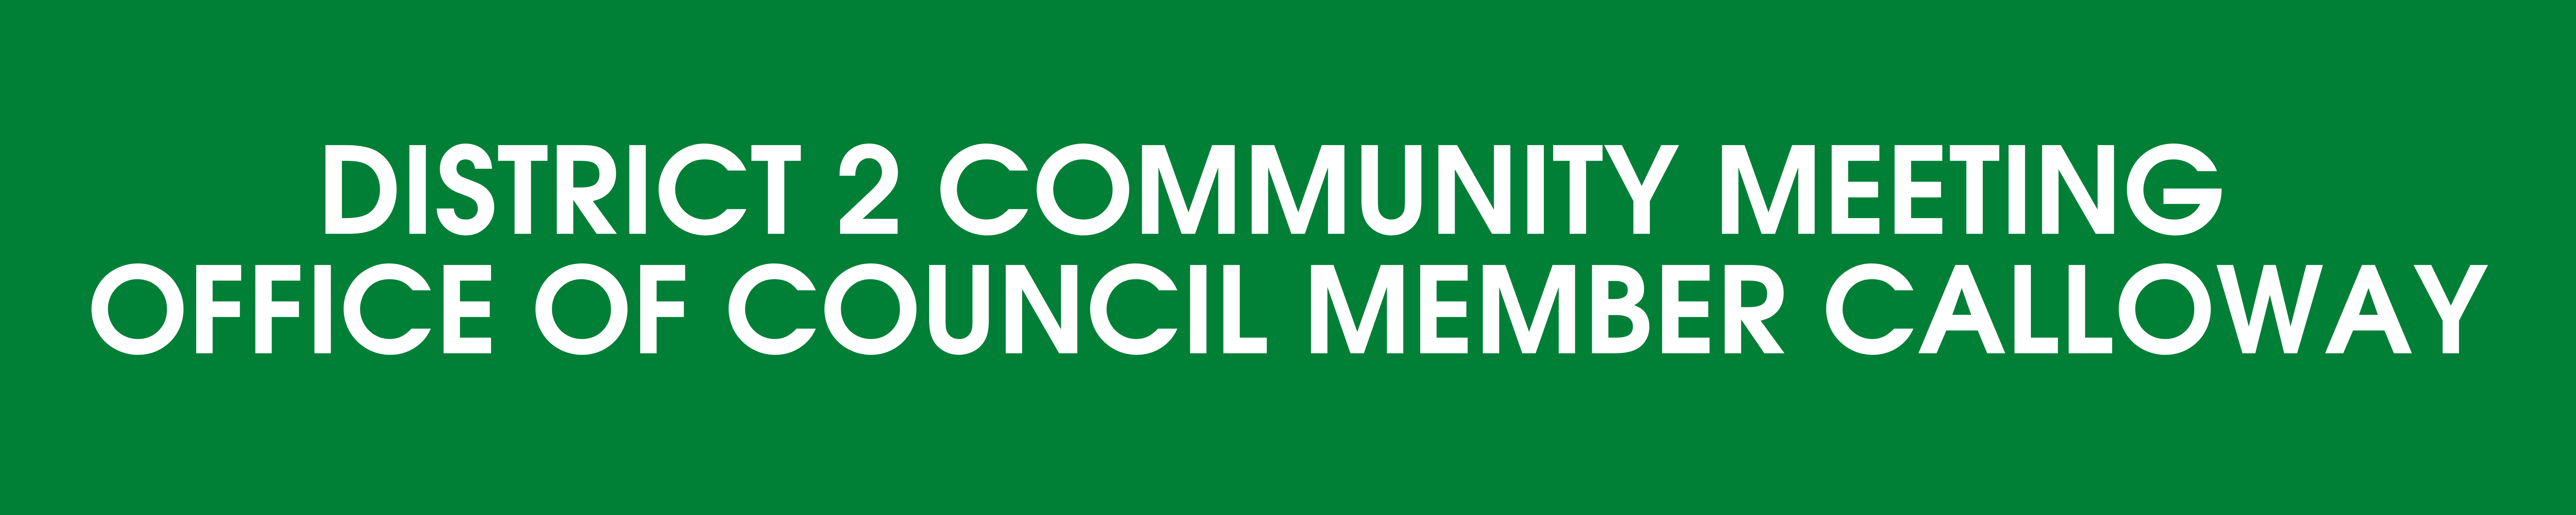 District 3 Community Meeting Banner